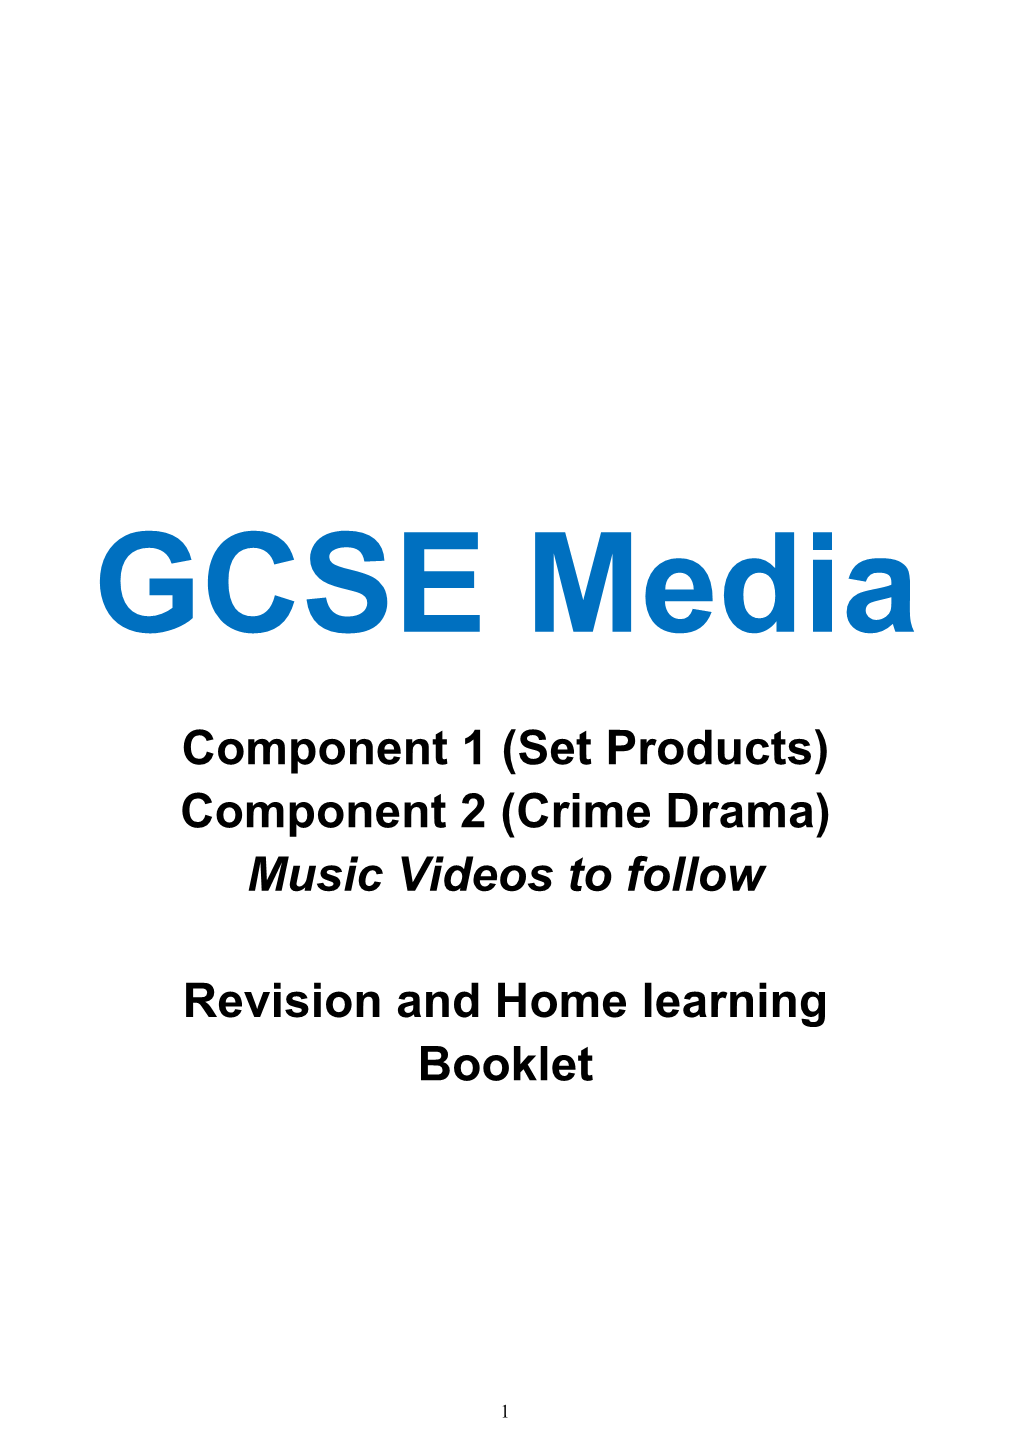 Component 1 (Set Products) Component 2 (Crime Drama) Music Videos to Follow Revision and Home Learning Booklet